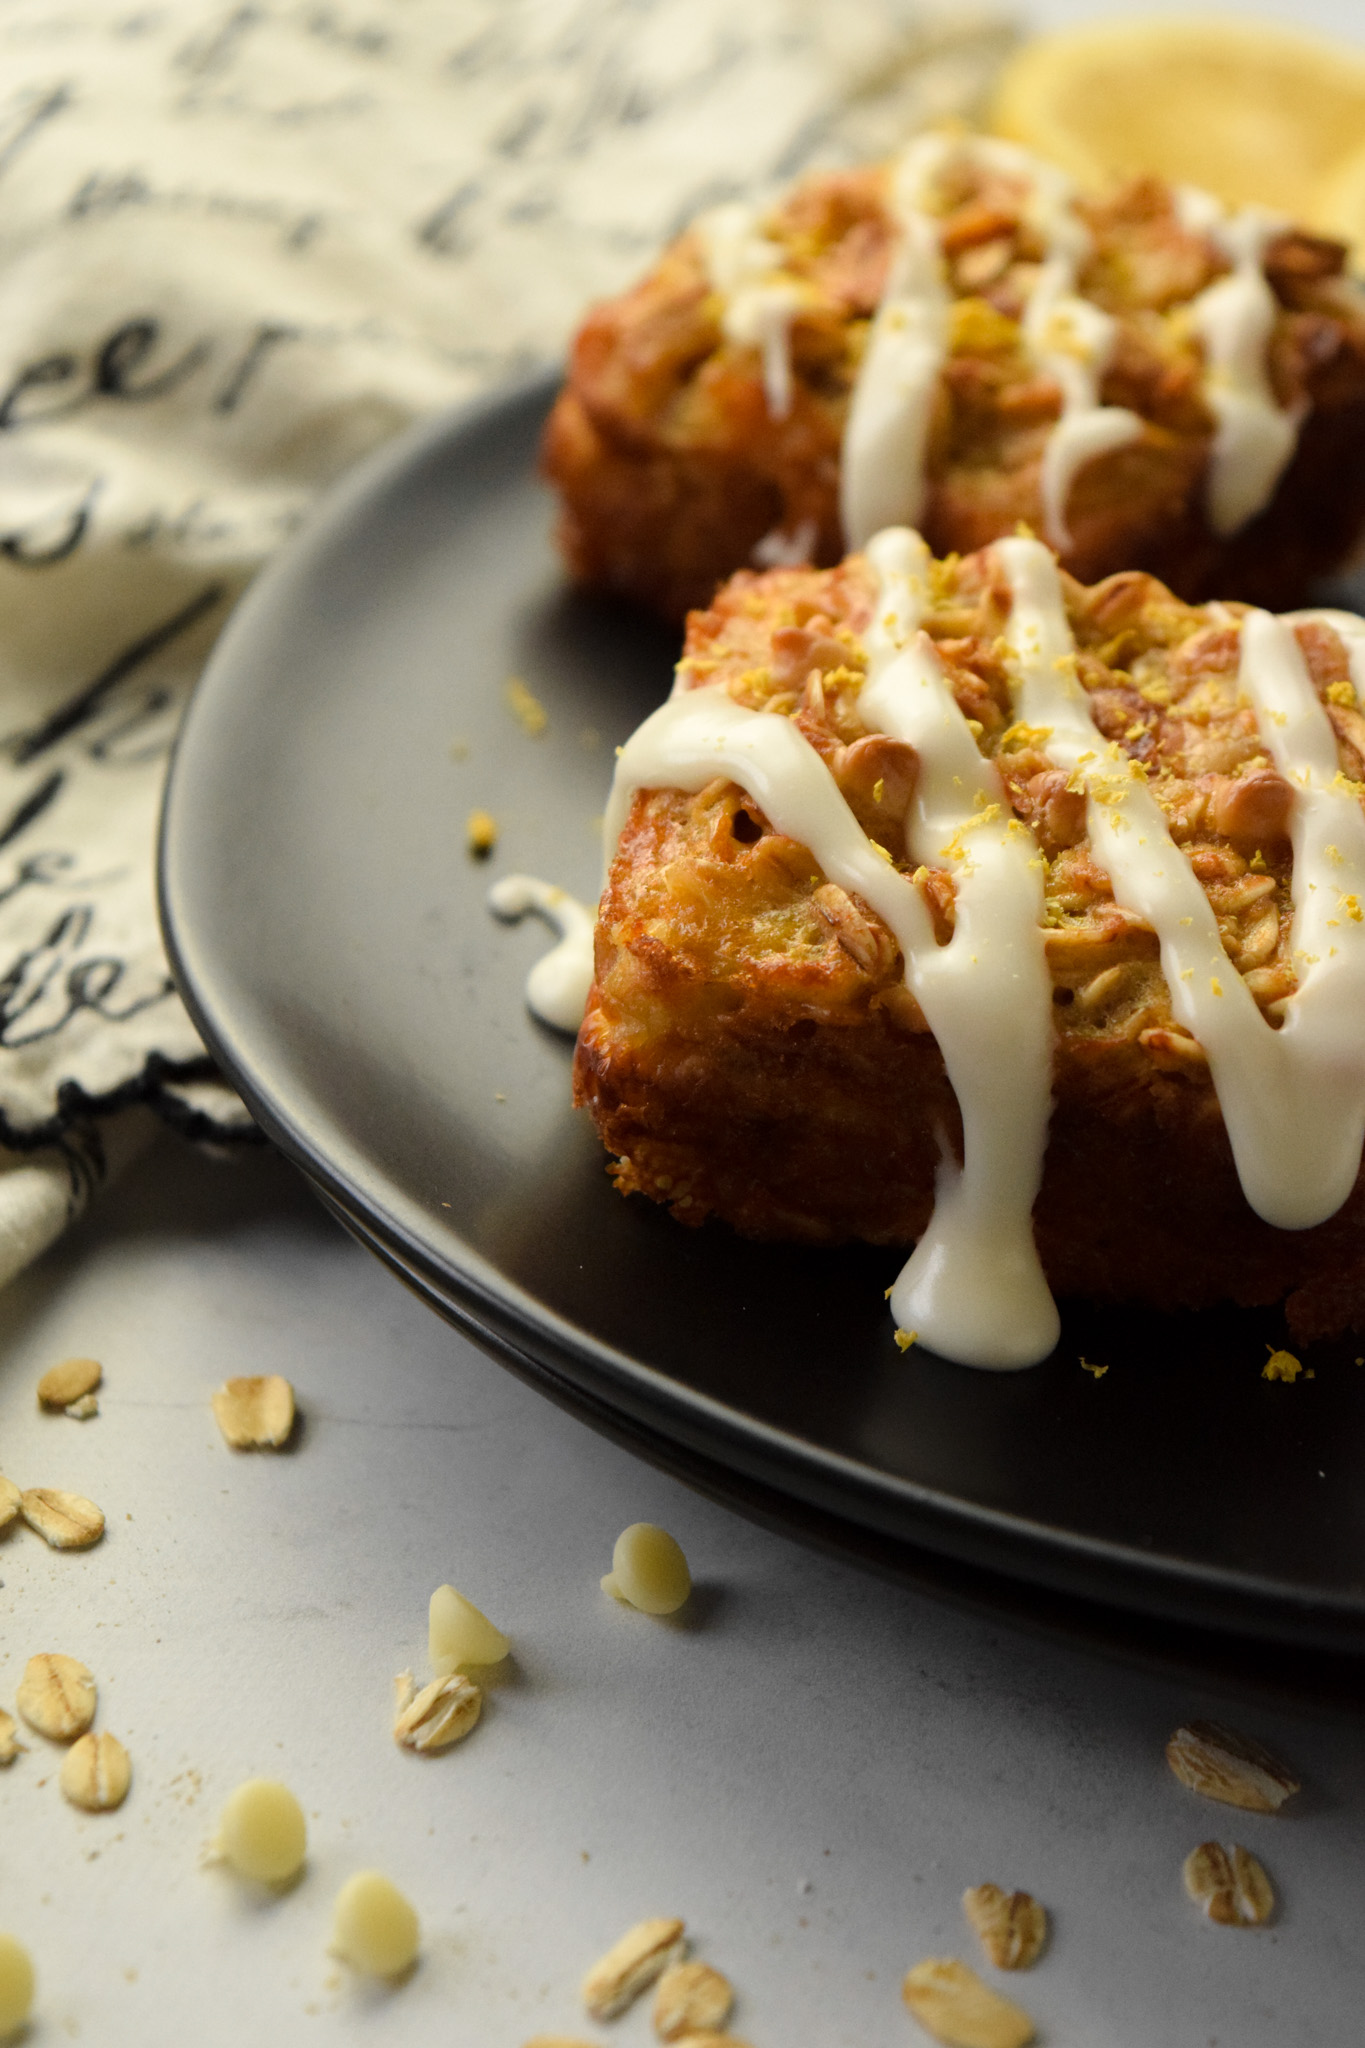 GLuten Free Lemon Baked Oatmeal Squares with a Lemon Drizzle